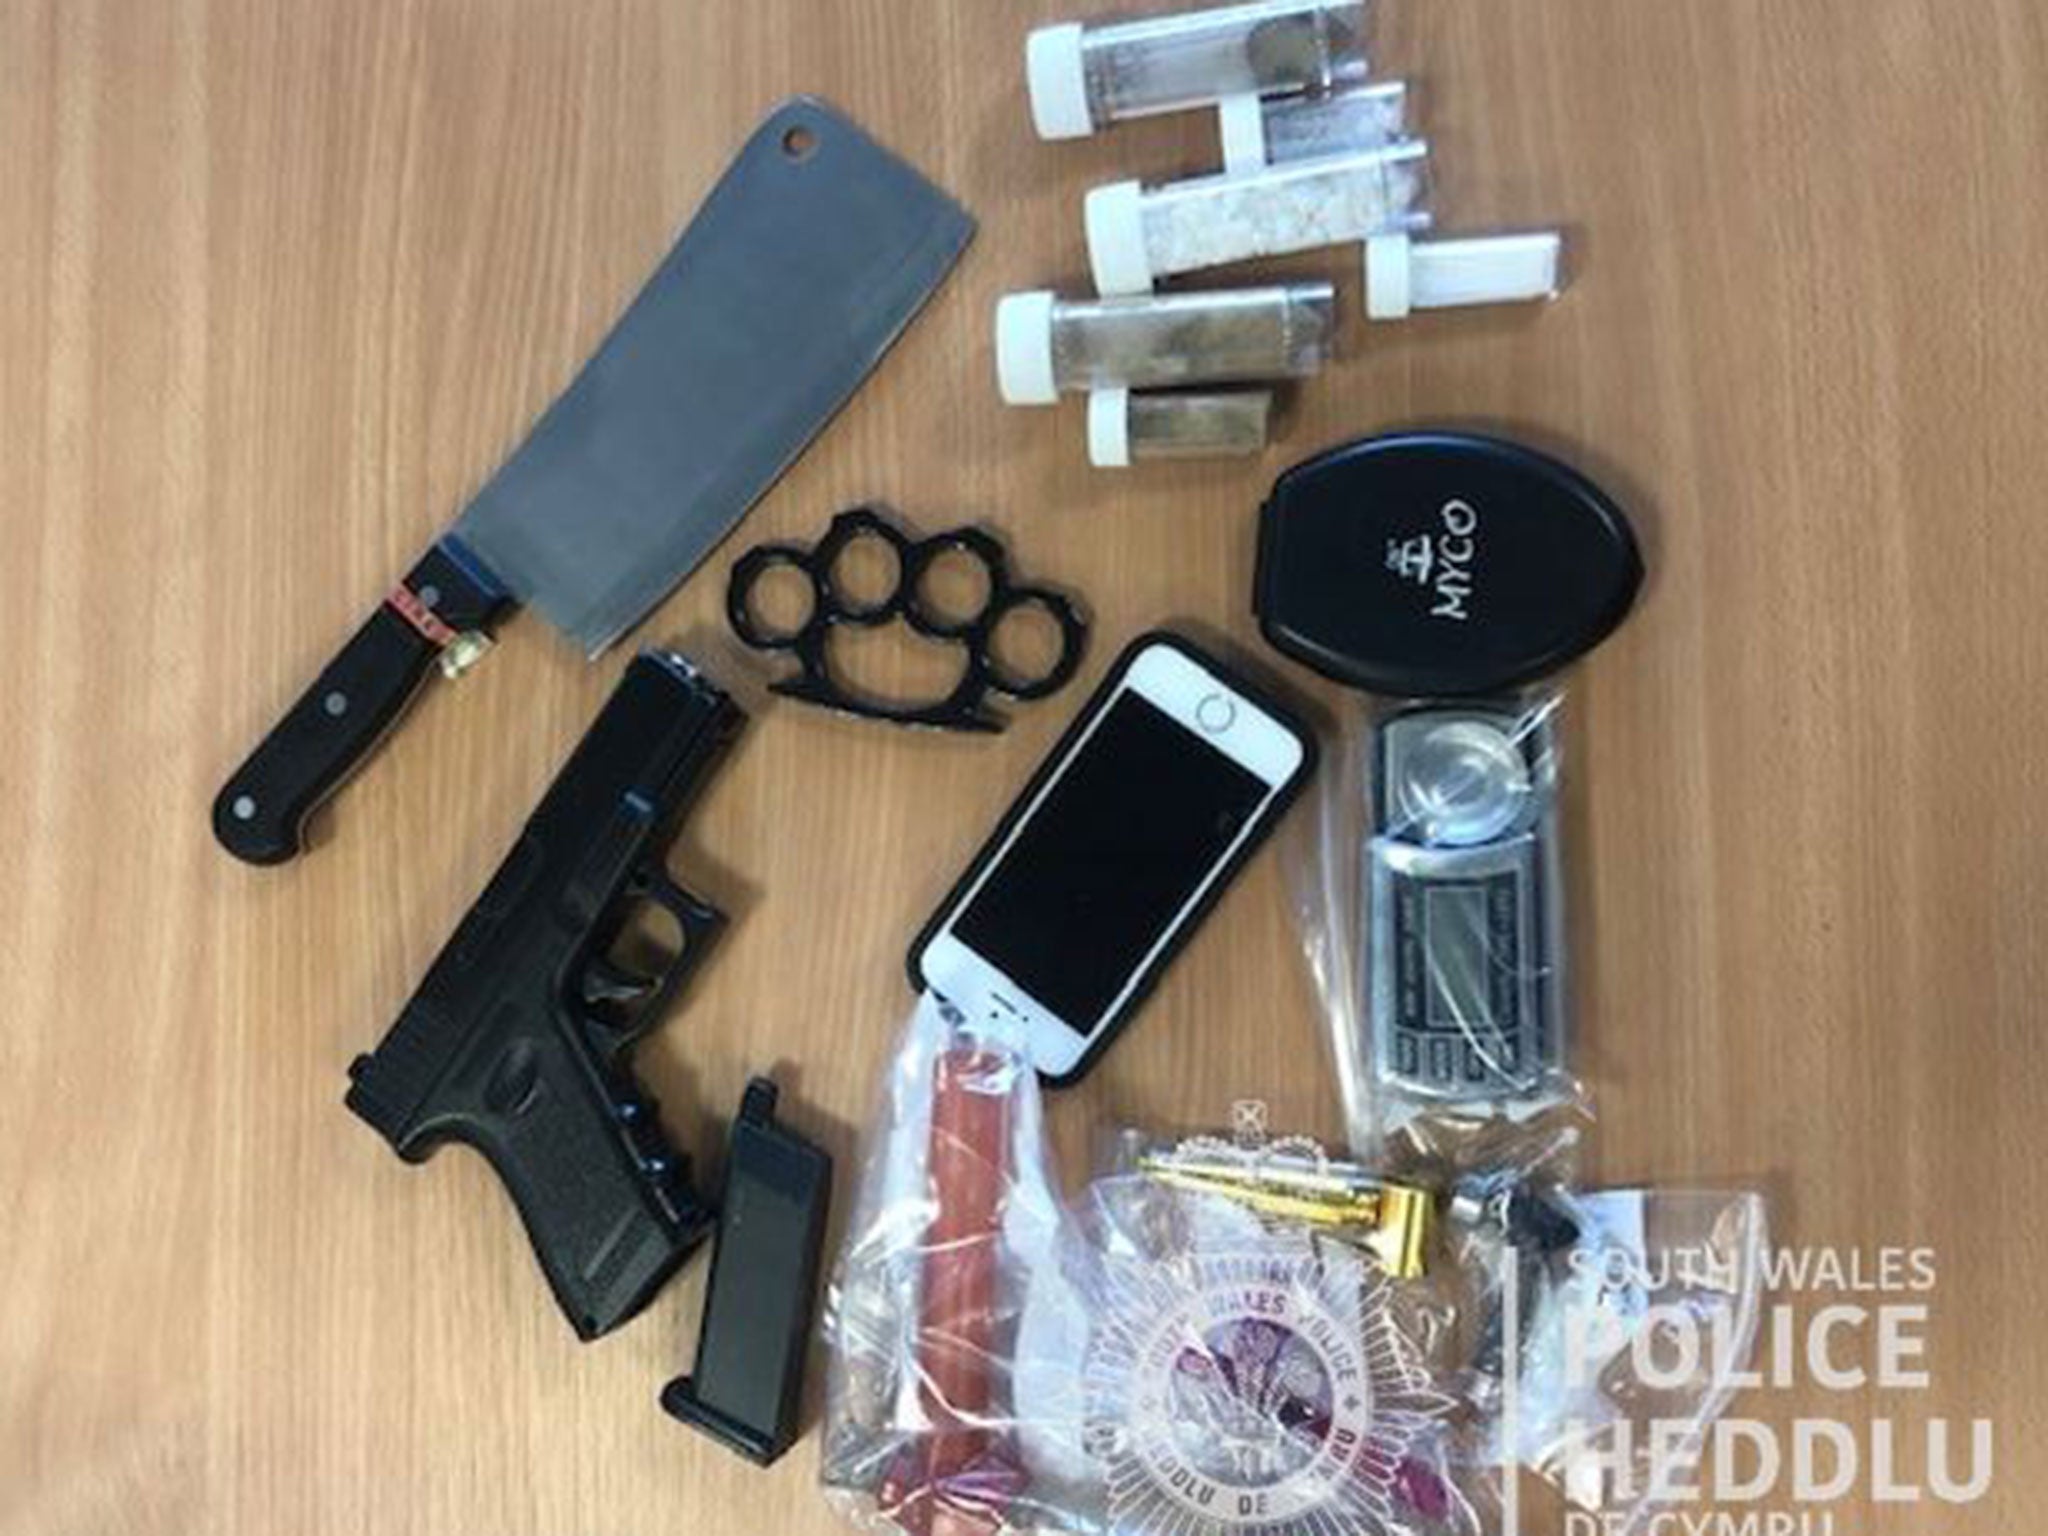 Weapons and drug paraphernalia found at a home used by a county lines gang that used London teenagers to run drugs